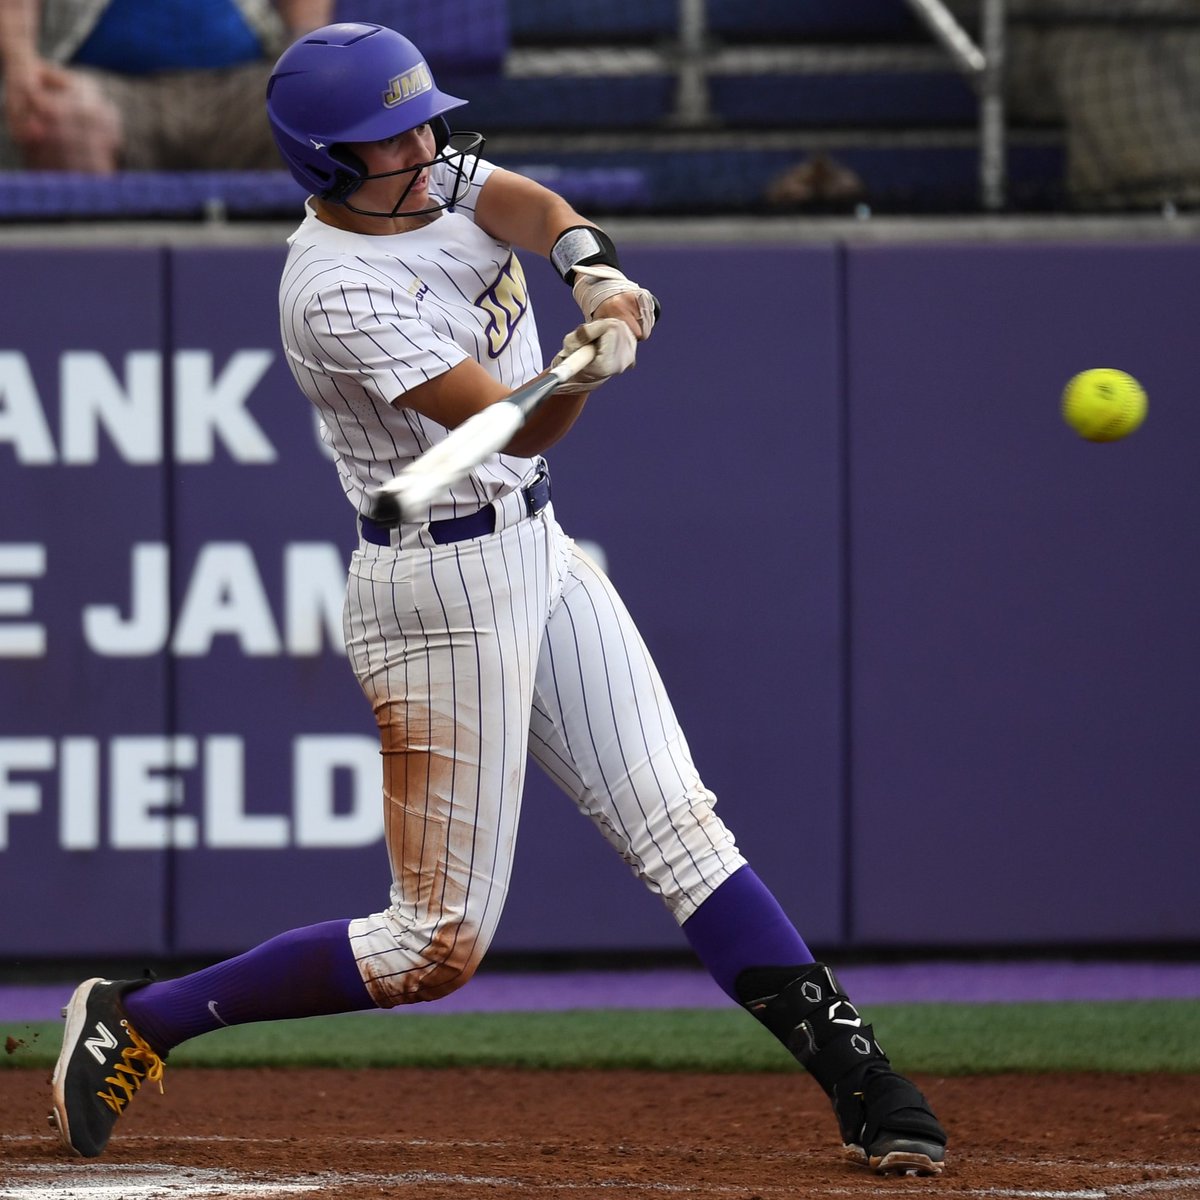 I caught up with James Madison LF/P Payton List as she was named the Sun Belt Freshman of the Year and is on the All-SBC First Team. List and the Dukes play Southern Miss today in the first round of the SBC tournament. 🔊 on.soundcloud.com/HiA9QXxtem4kup… @JMUSoftball | @PaytonList2022